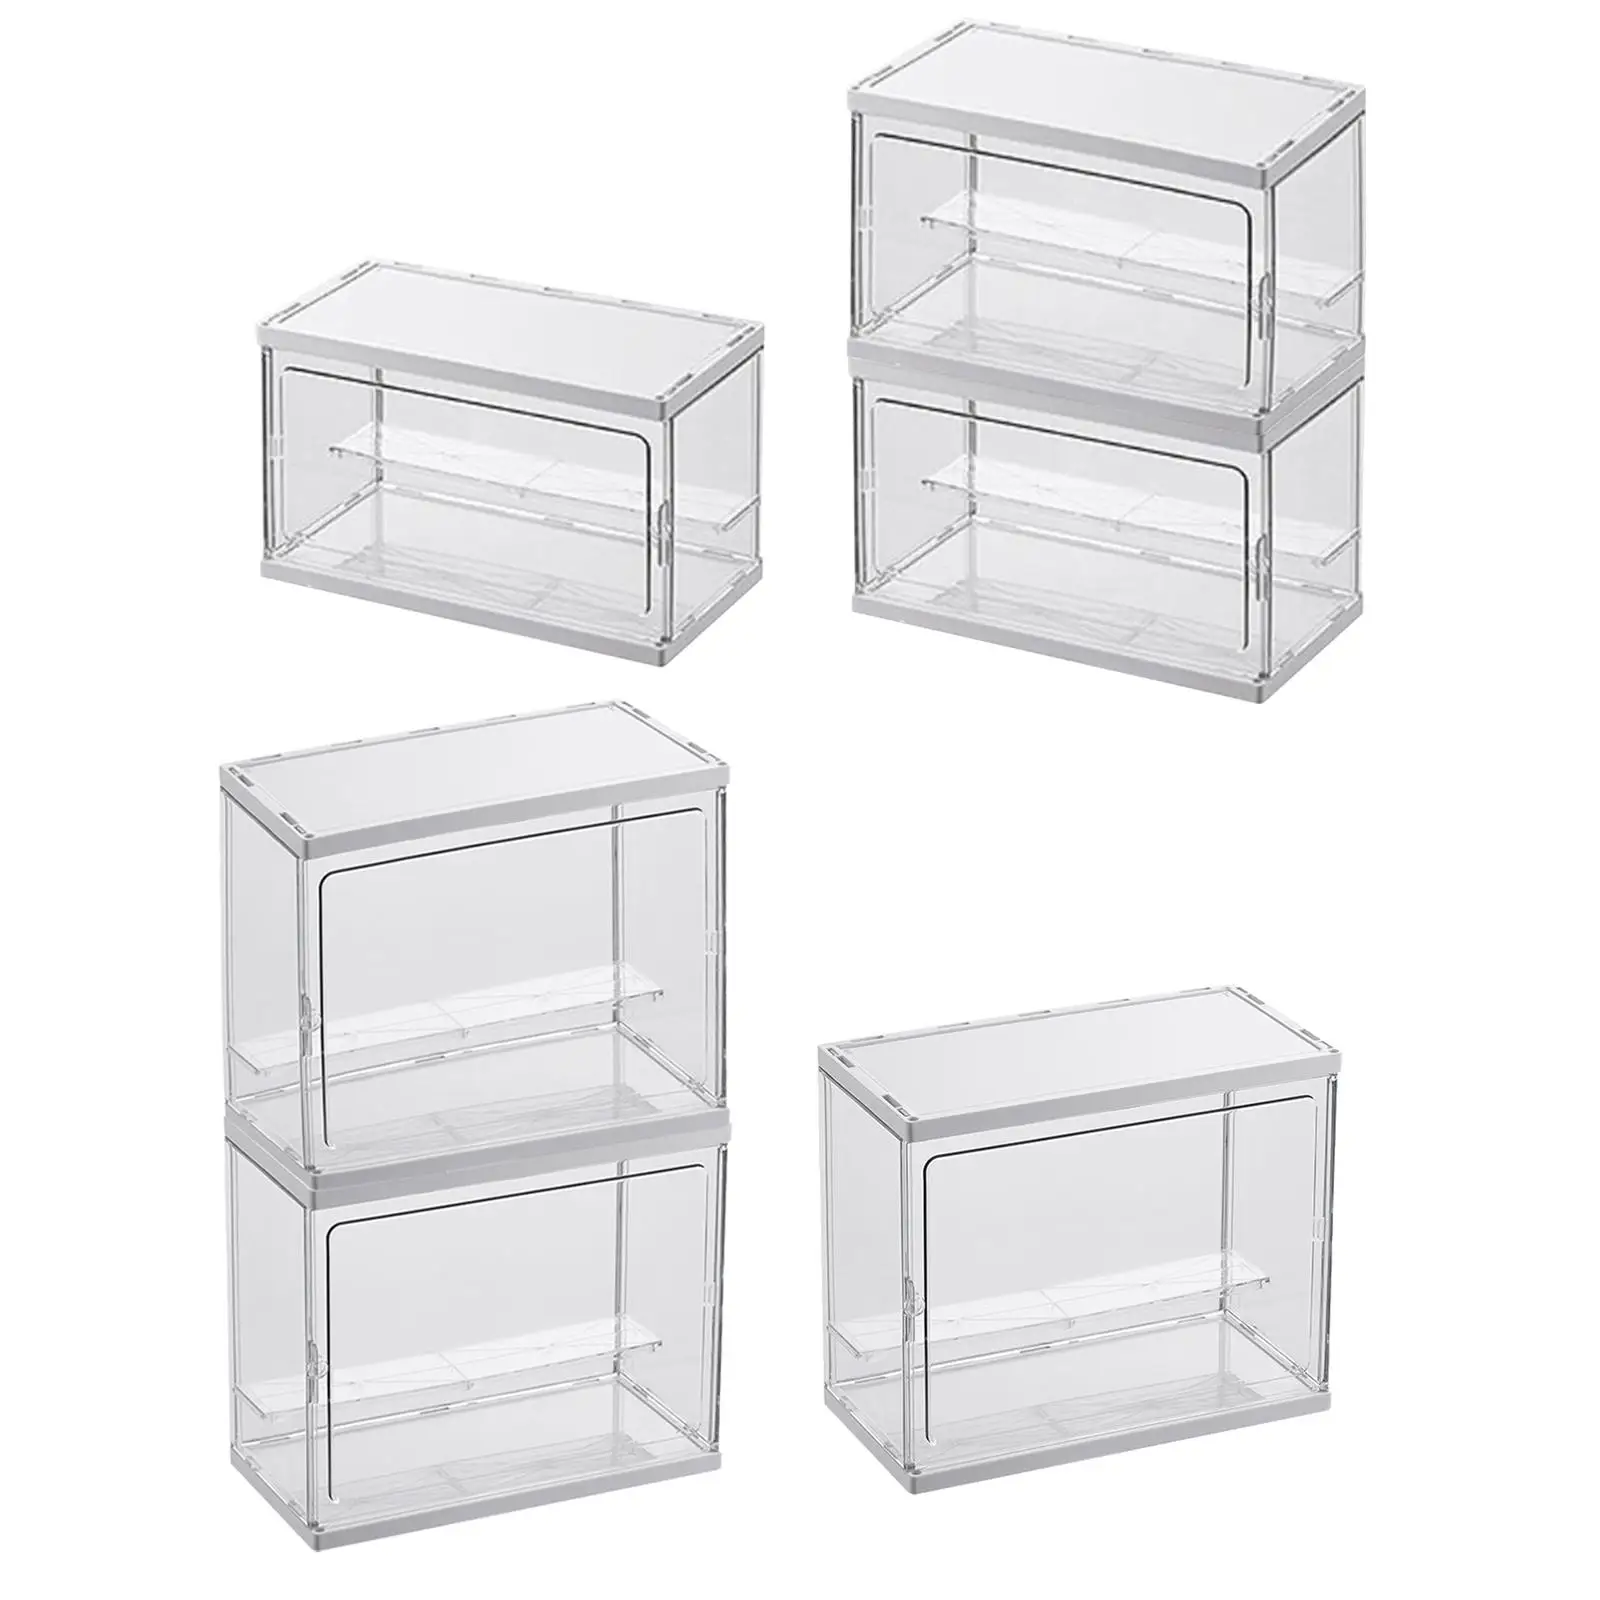 Clear Model Toy Display Case Action Figures Display Box Model Toy Dustproof for Model Figures Vehicle Toys Dolls Toy